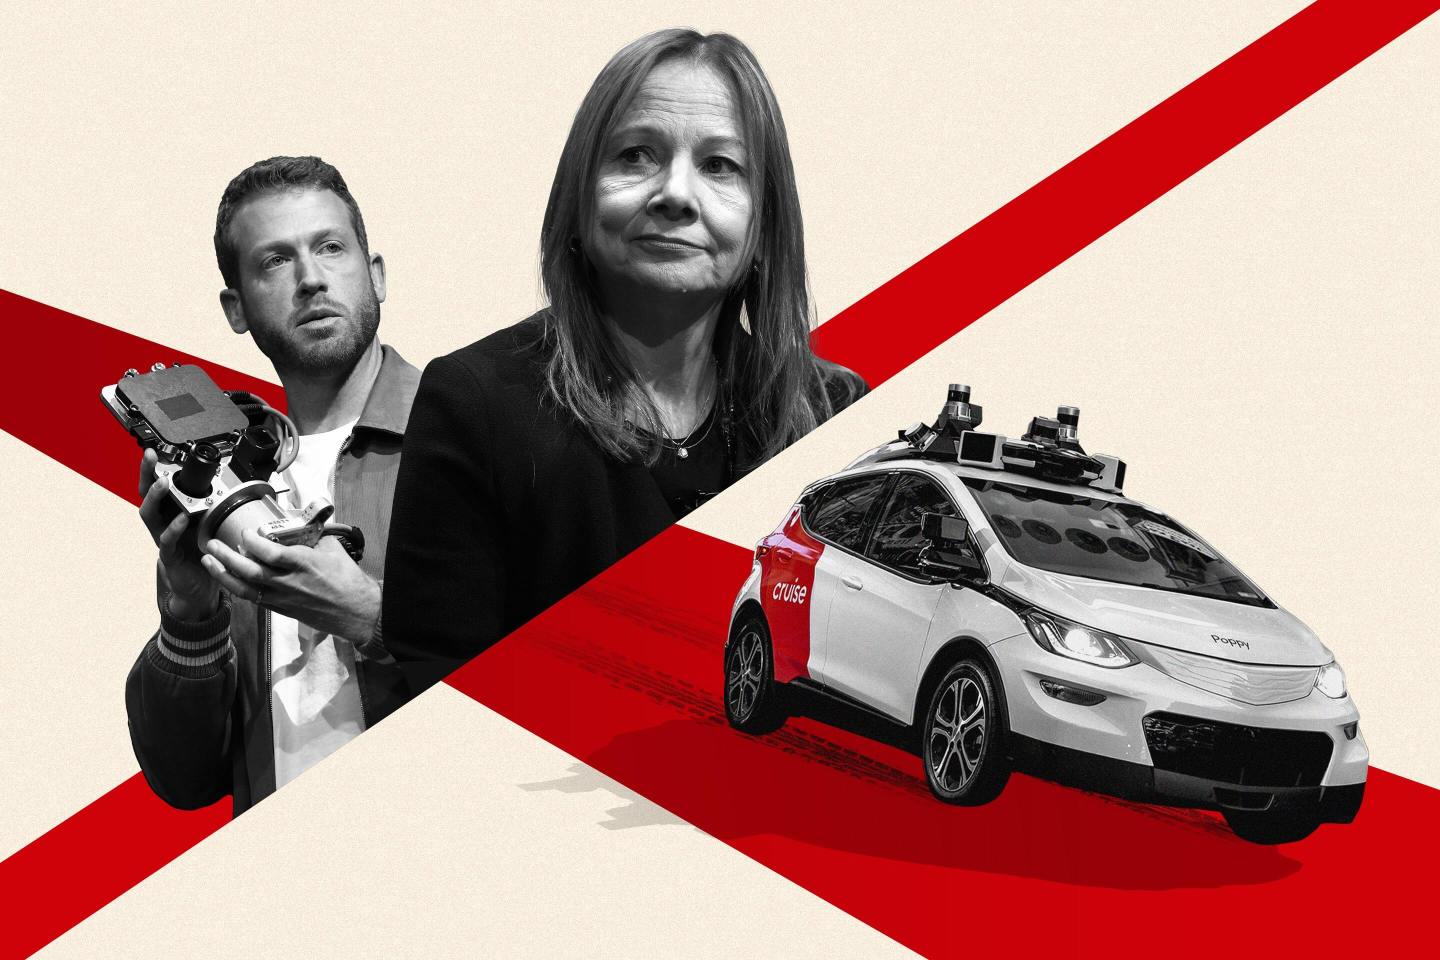 Photo illustration of Cruise co-founder Kyle Vogt, GM CEO Mary Barra, and a cruise car.